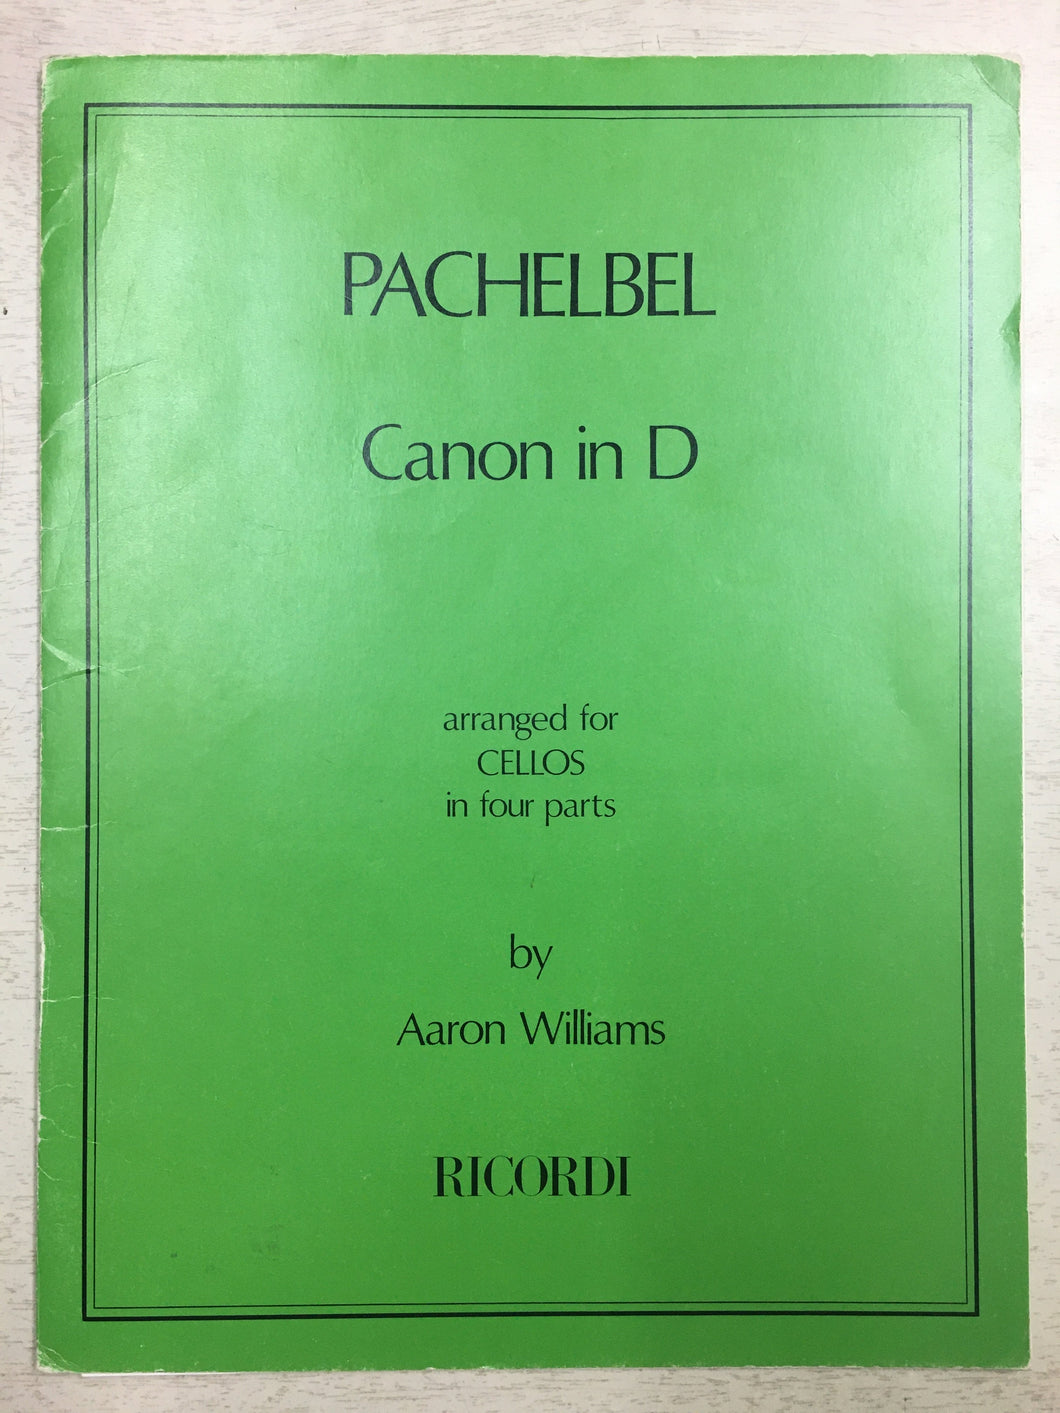 Pachelbel - Canon in D arranged for CELLOS in Four Parts, arr. Aaron Williams